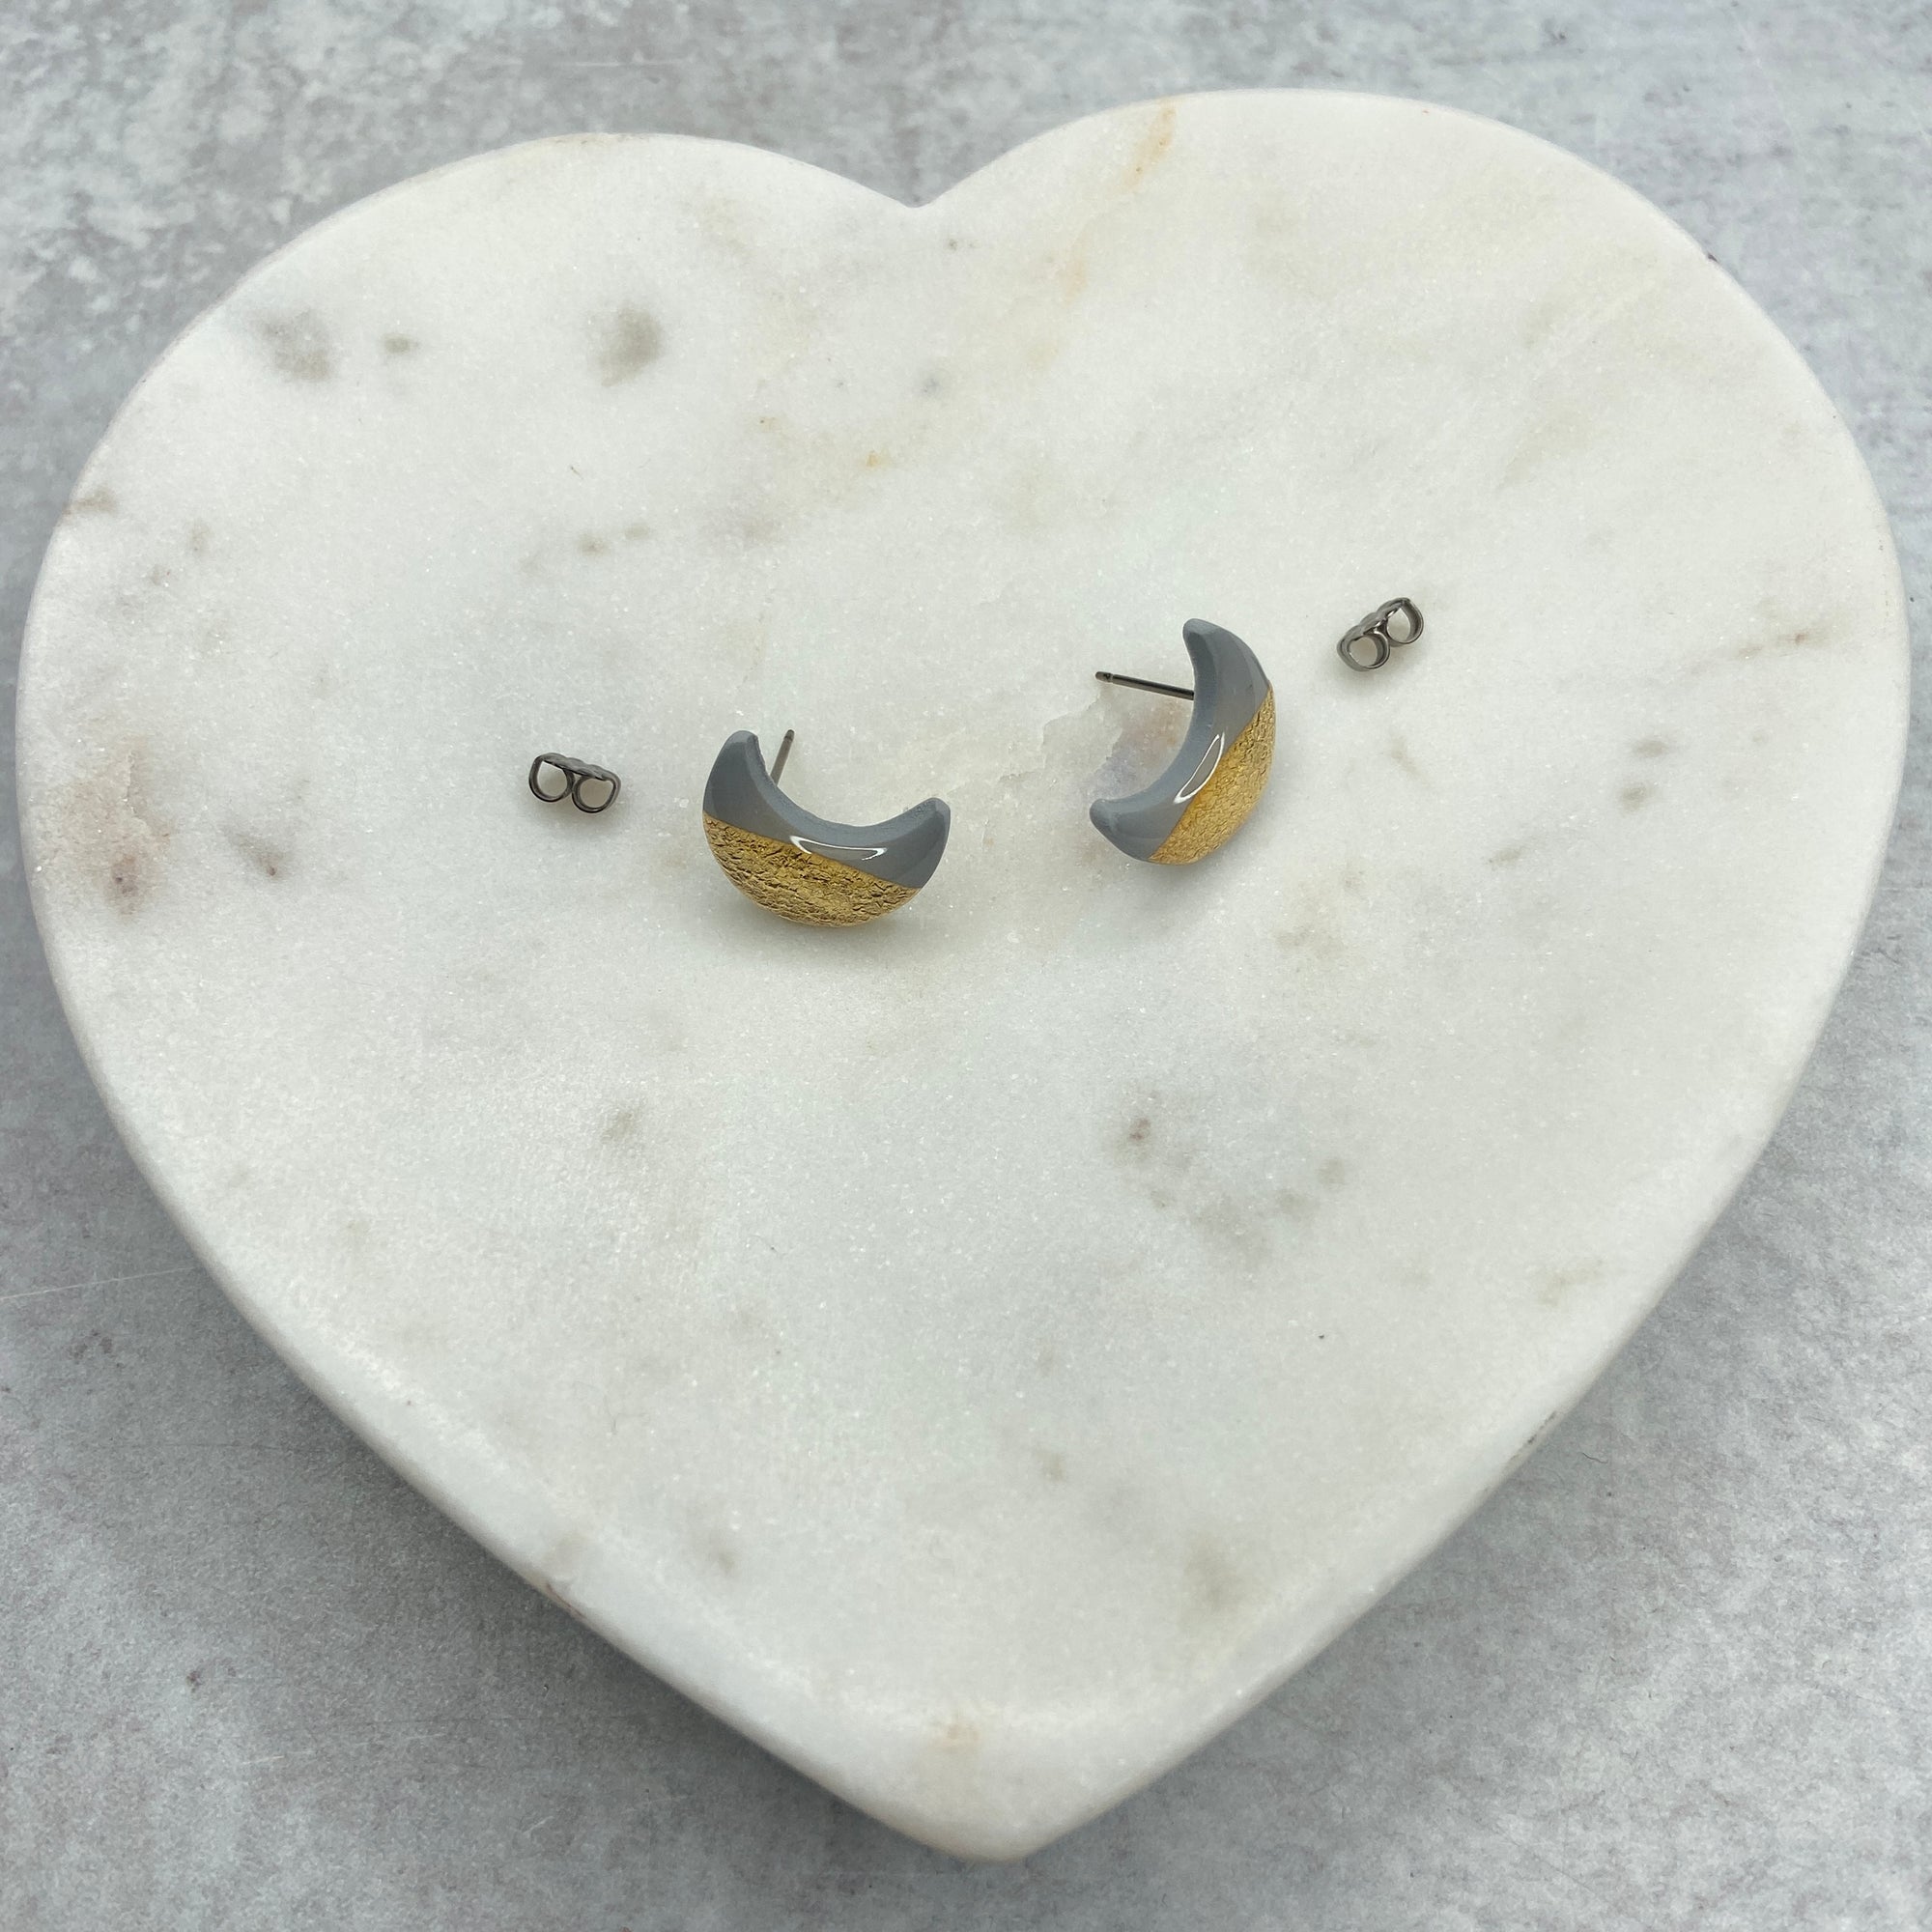 Gray and Gold Moon Stud Earrings